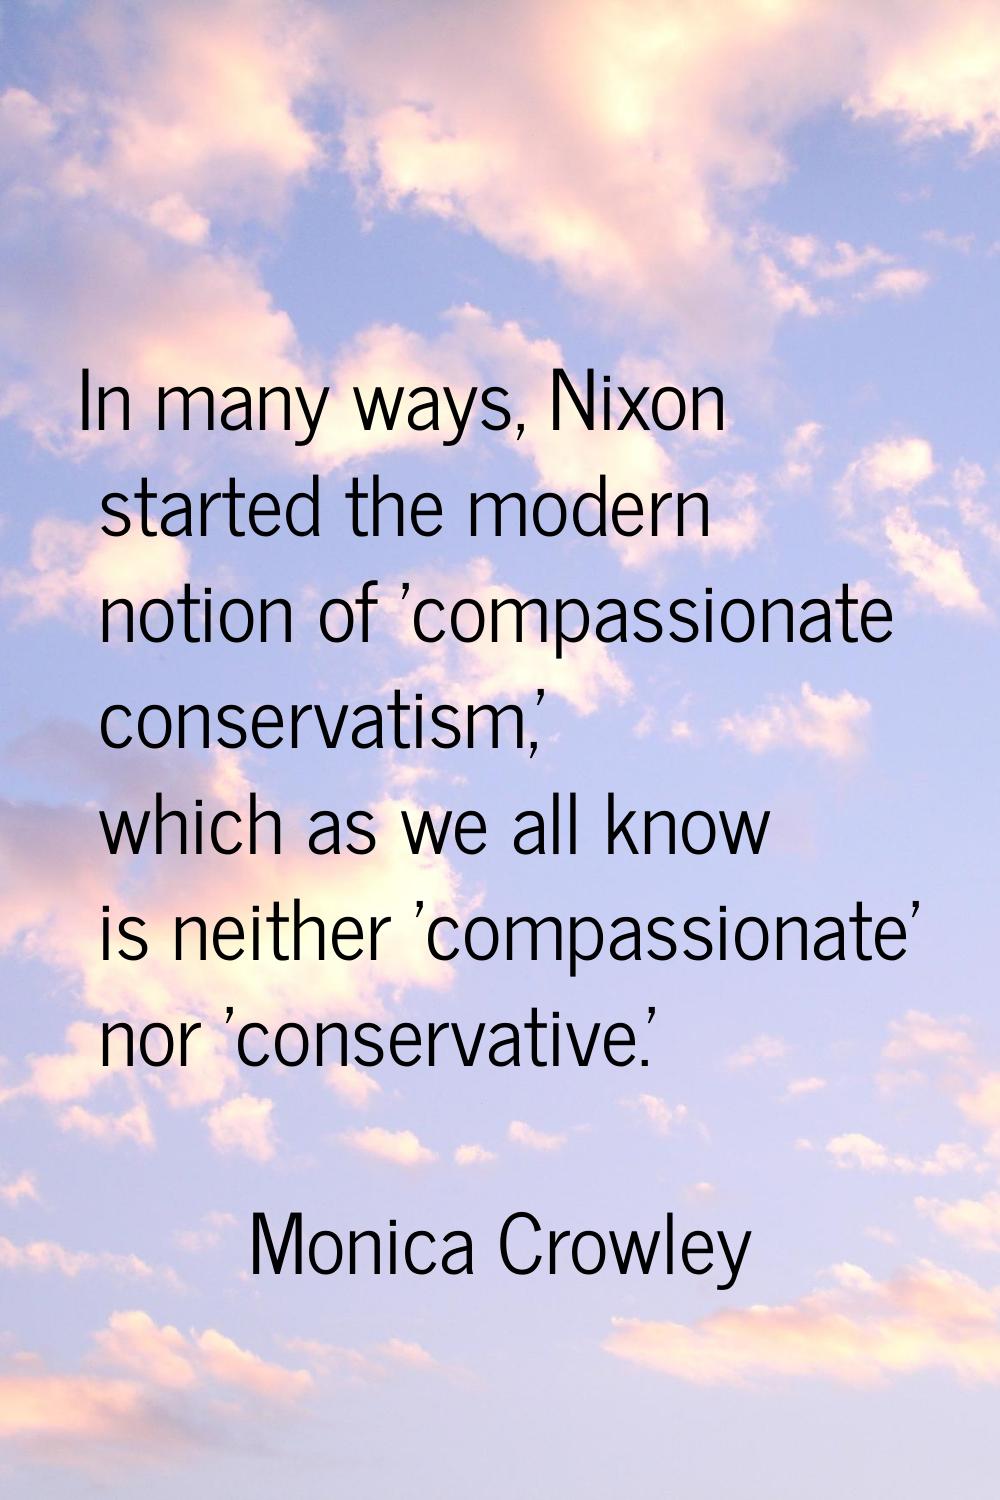 In many ways, Nixon started the modern notion of 'compassionate conservatism,' which as we all know